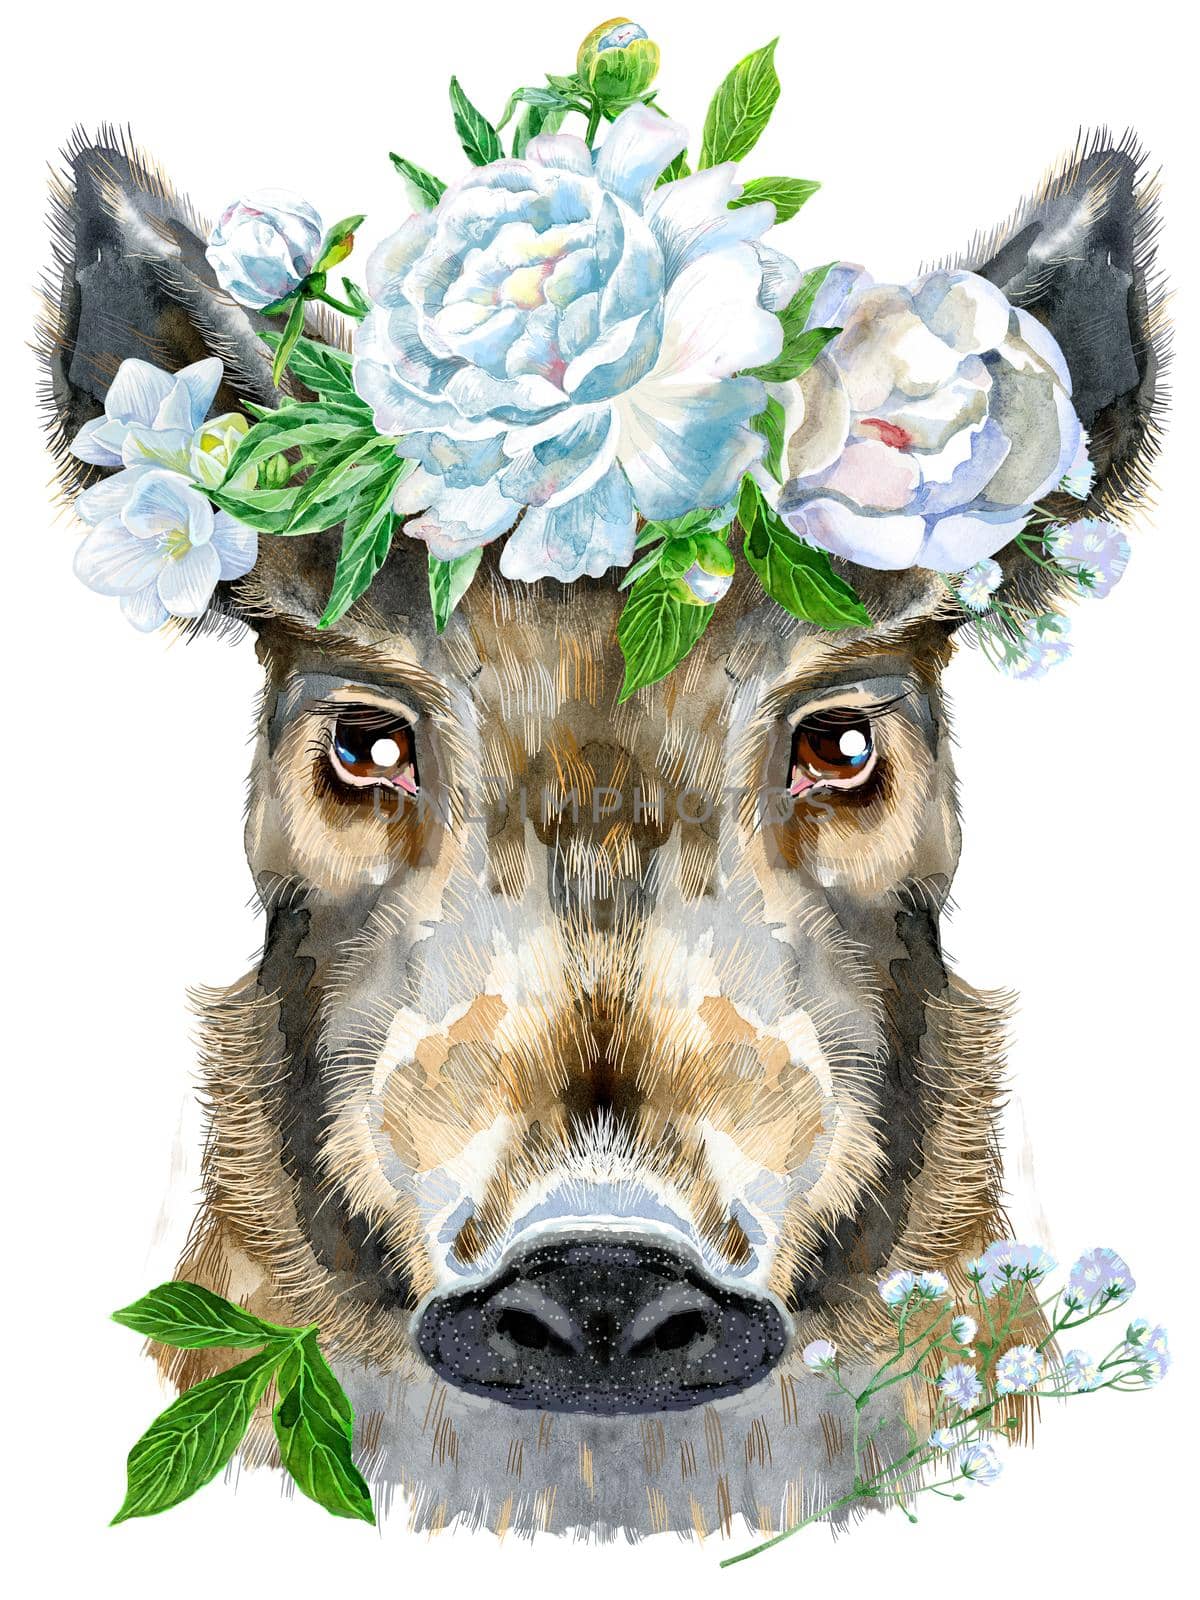 Watercolor portrait of wild boar in a wreath of white peonies and freesias by NataOmsk